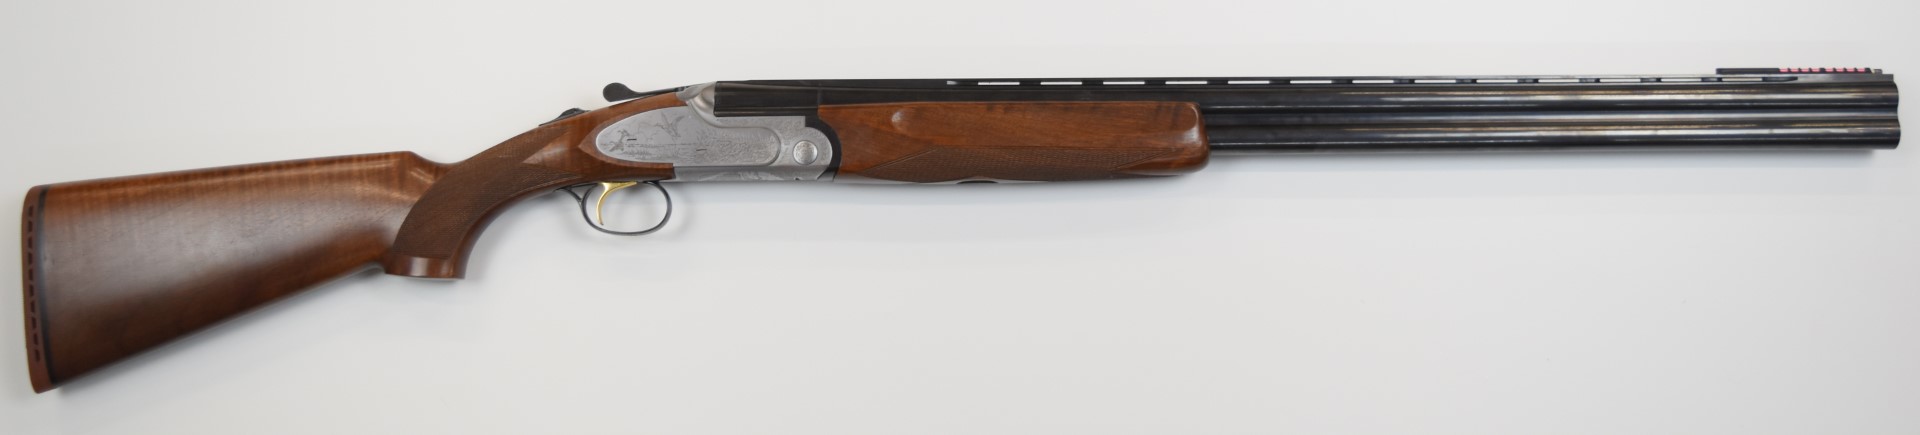 Sabatti 12 bore over under ejector shotgun with engraved scenes of birds to the sidelock plates - Image 2 of 12